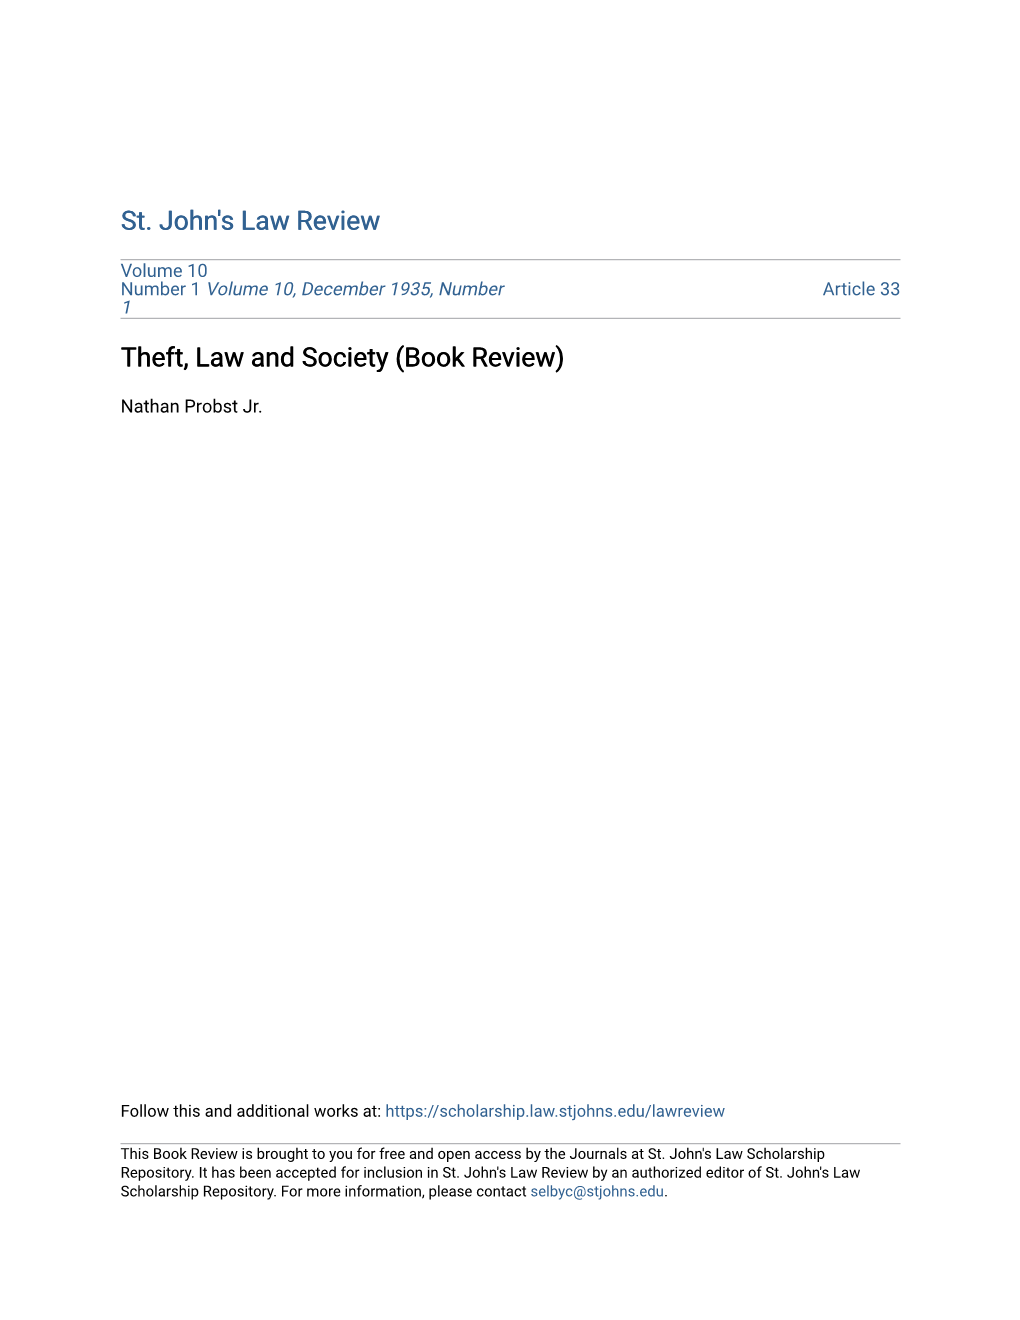 Theft, Law and Society (Book Review)